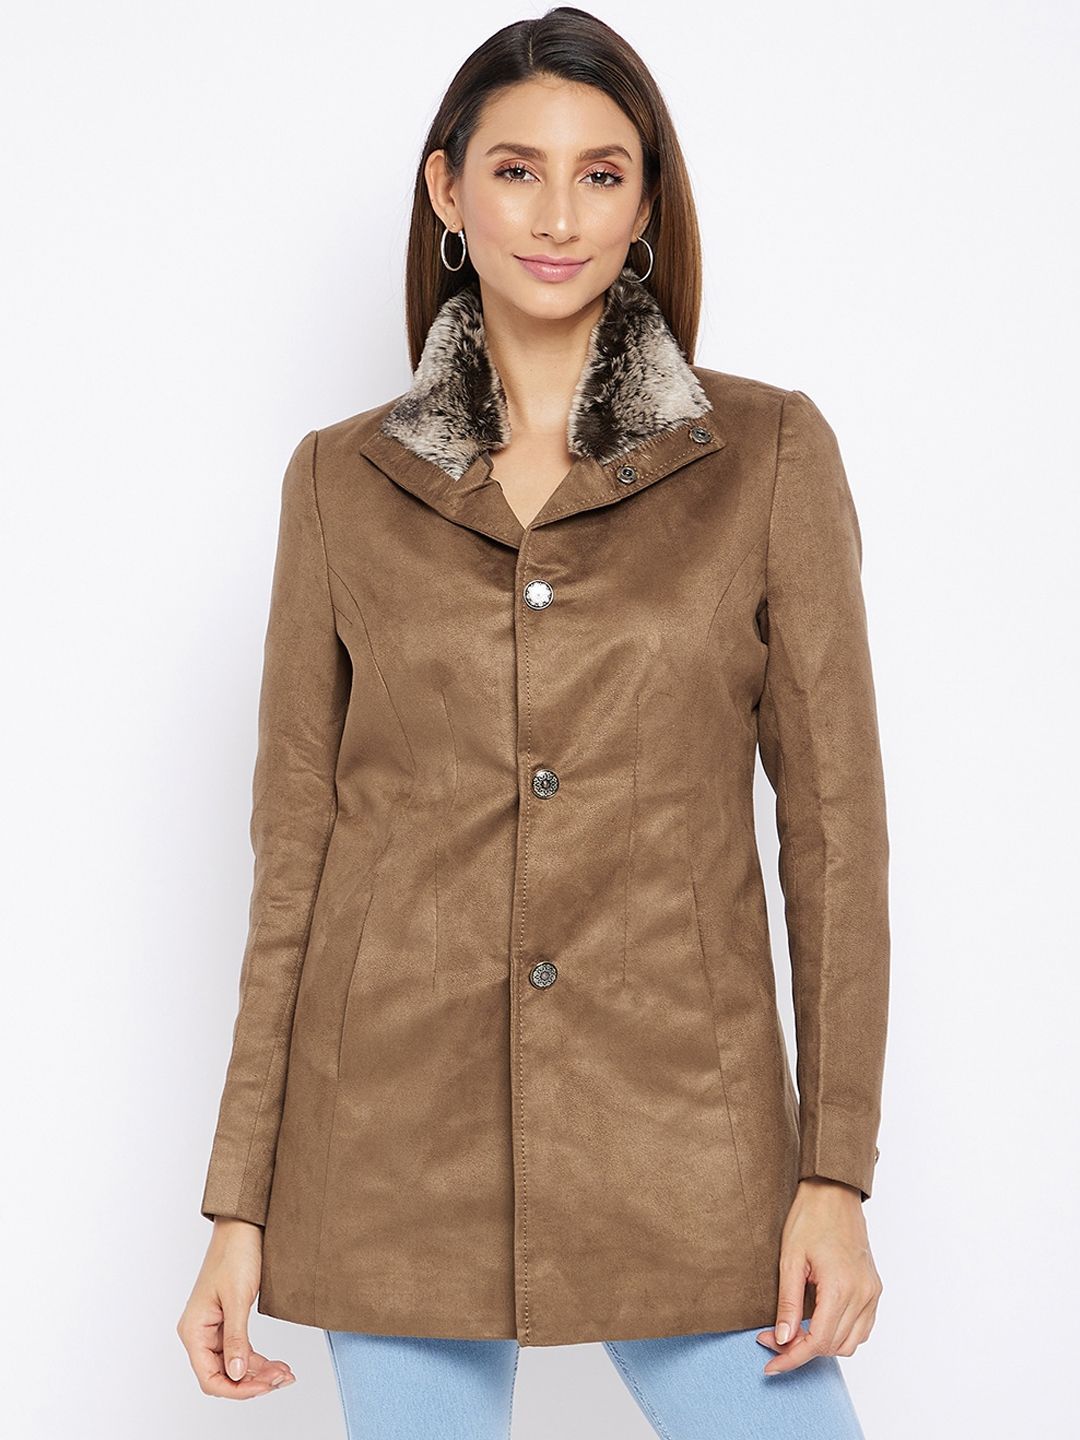 Spirit Women Brown Suede Notched Lapel Blazers Price in India